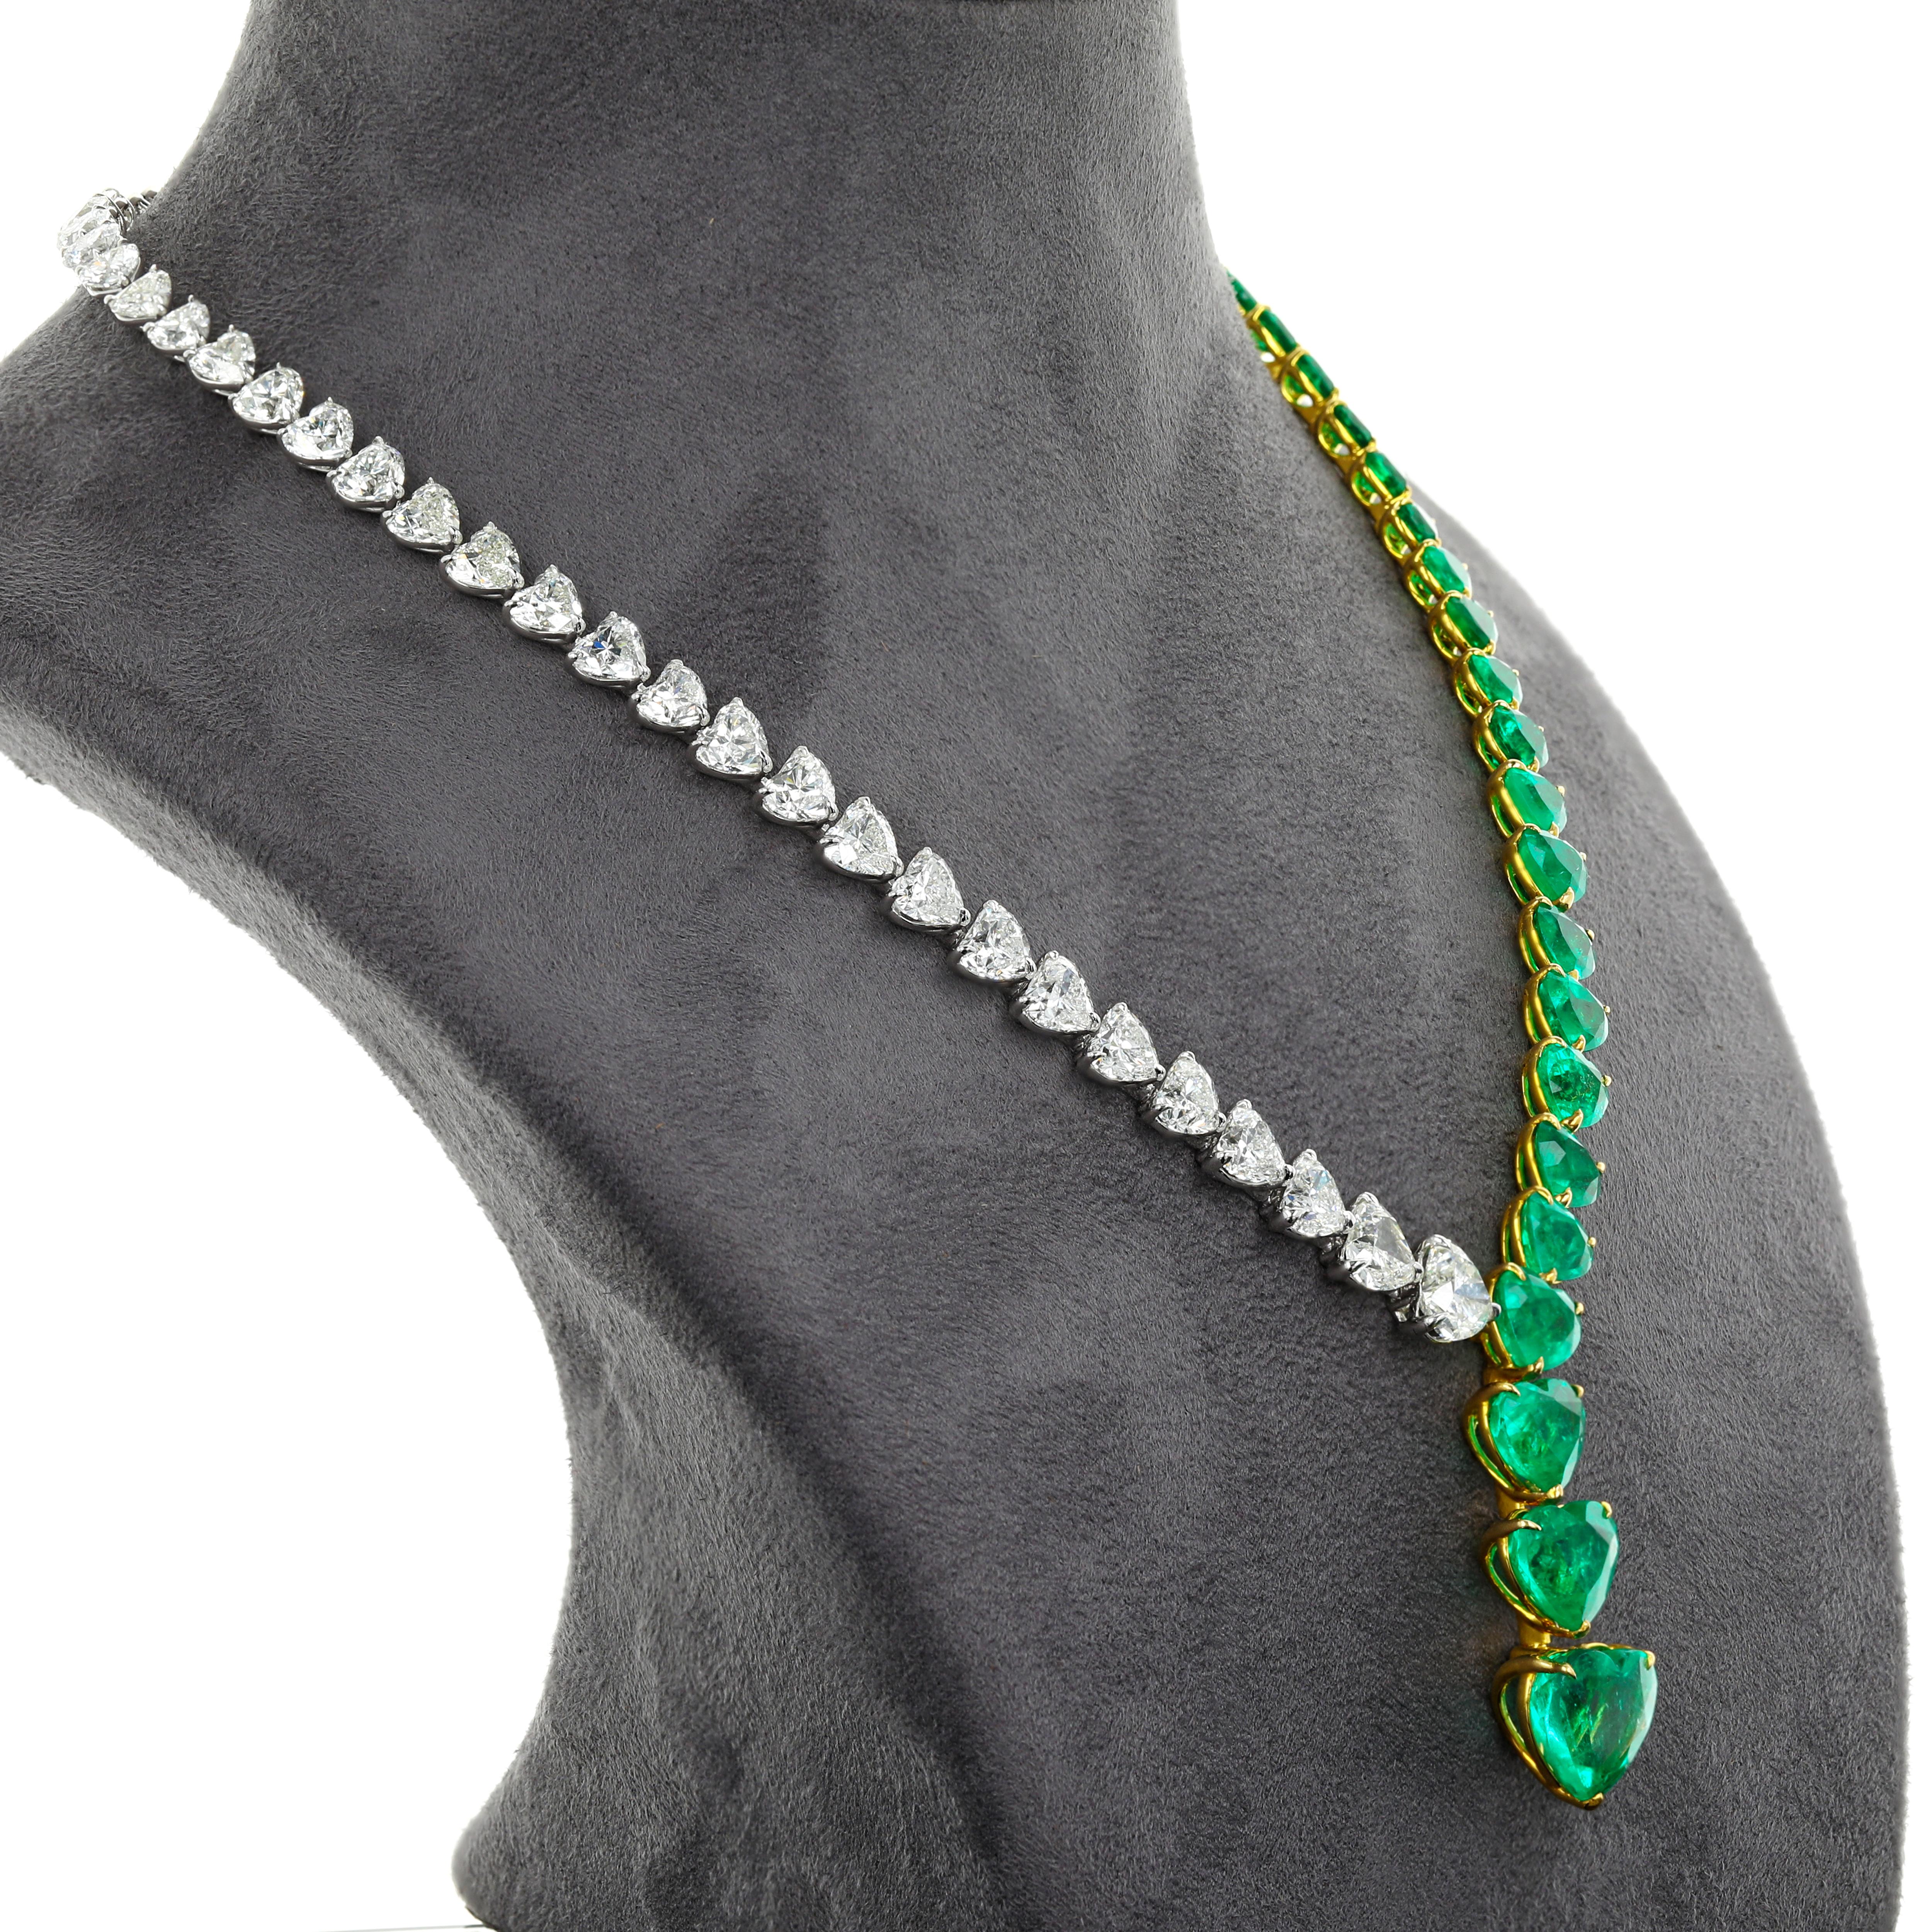 A modern necklace showcasing vibrant and color-rich heart shaped Colombian emeralds, set 
alongside graduating heart shaped Diamonds in a beautiful design. The necklace has been set in 18K white gold with 28 pieces of emeralds that weigh 37.42